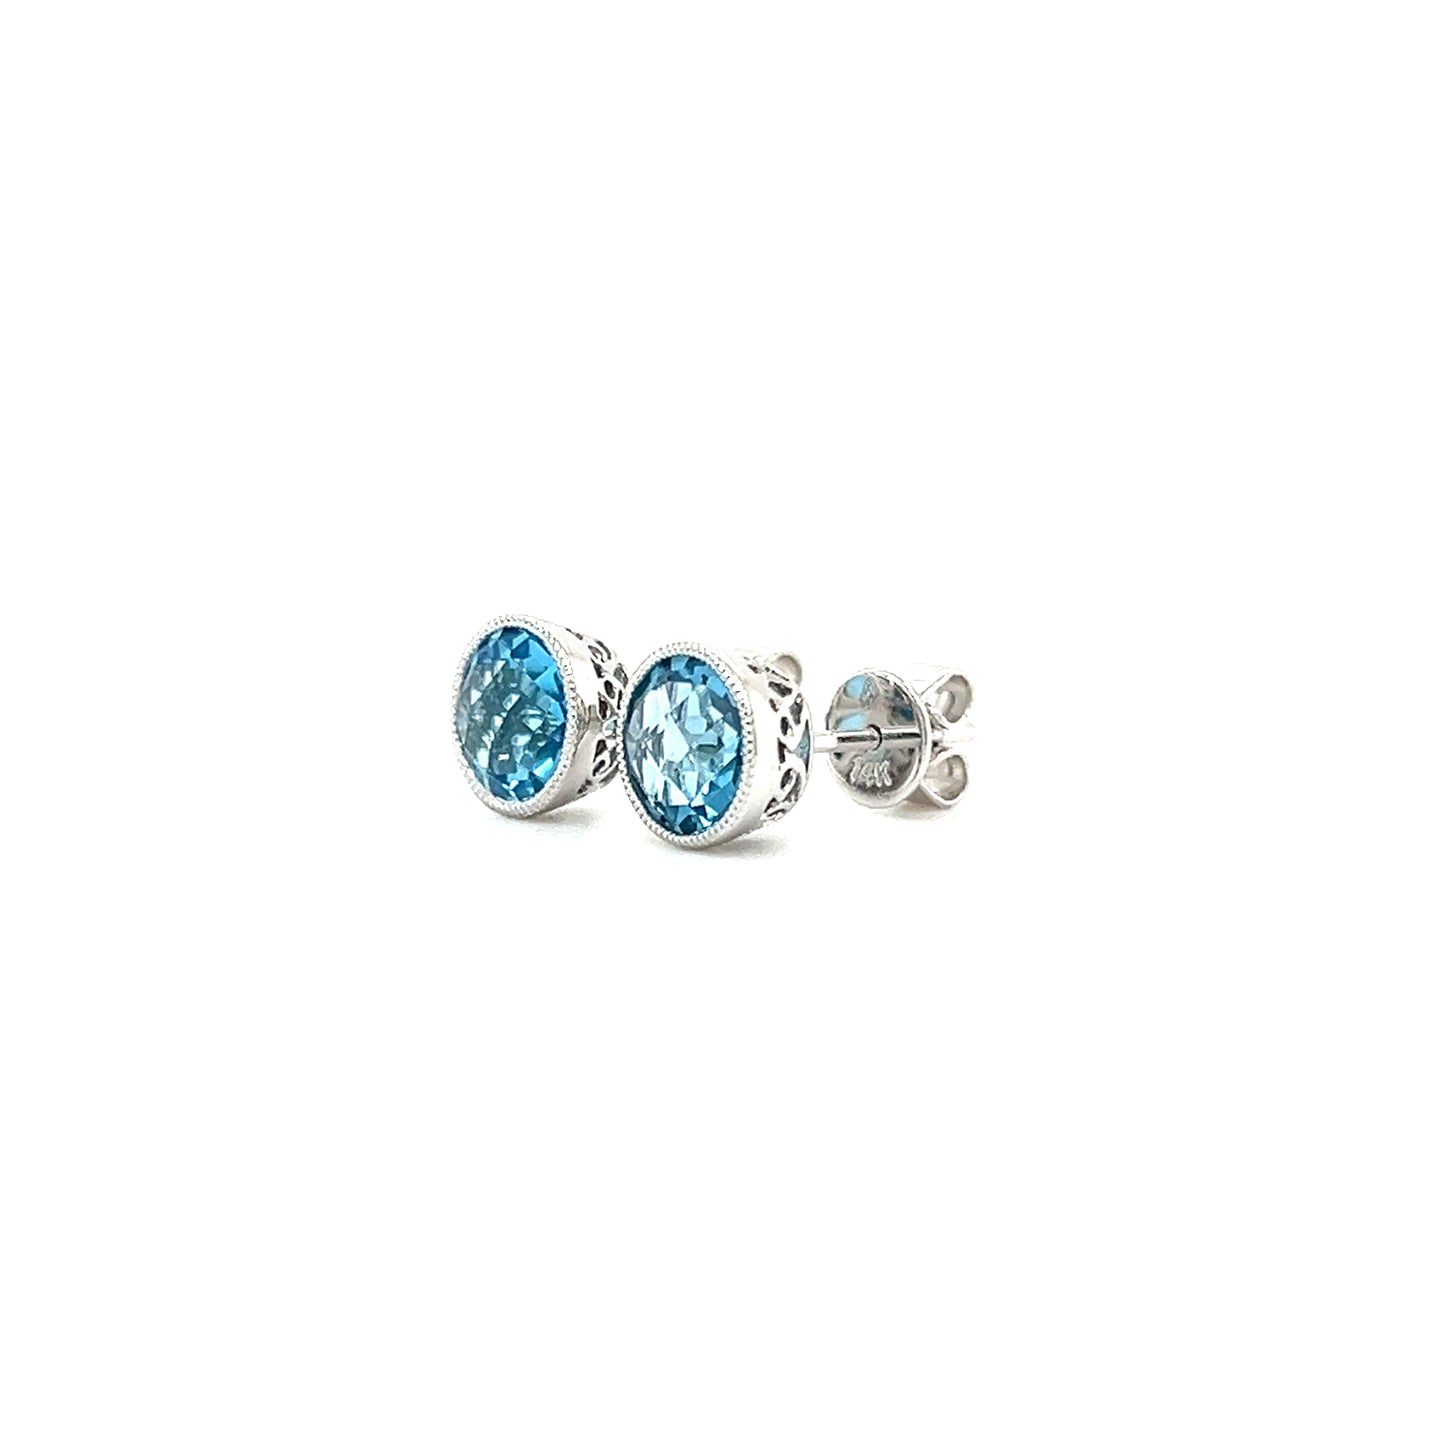 Blue Topaz Stud Earrings with Filigree and Milgrain Details in 14K White Gold Right Side View